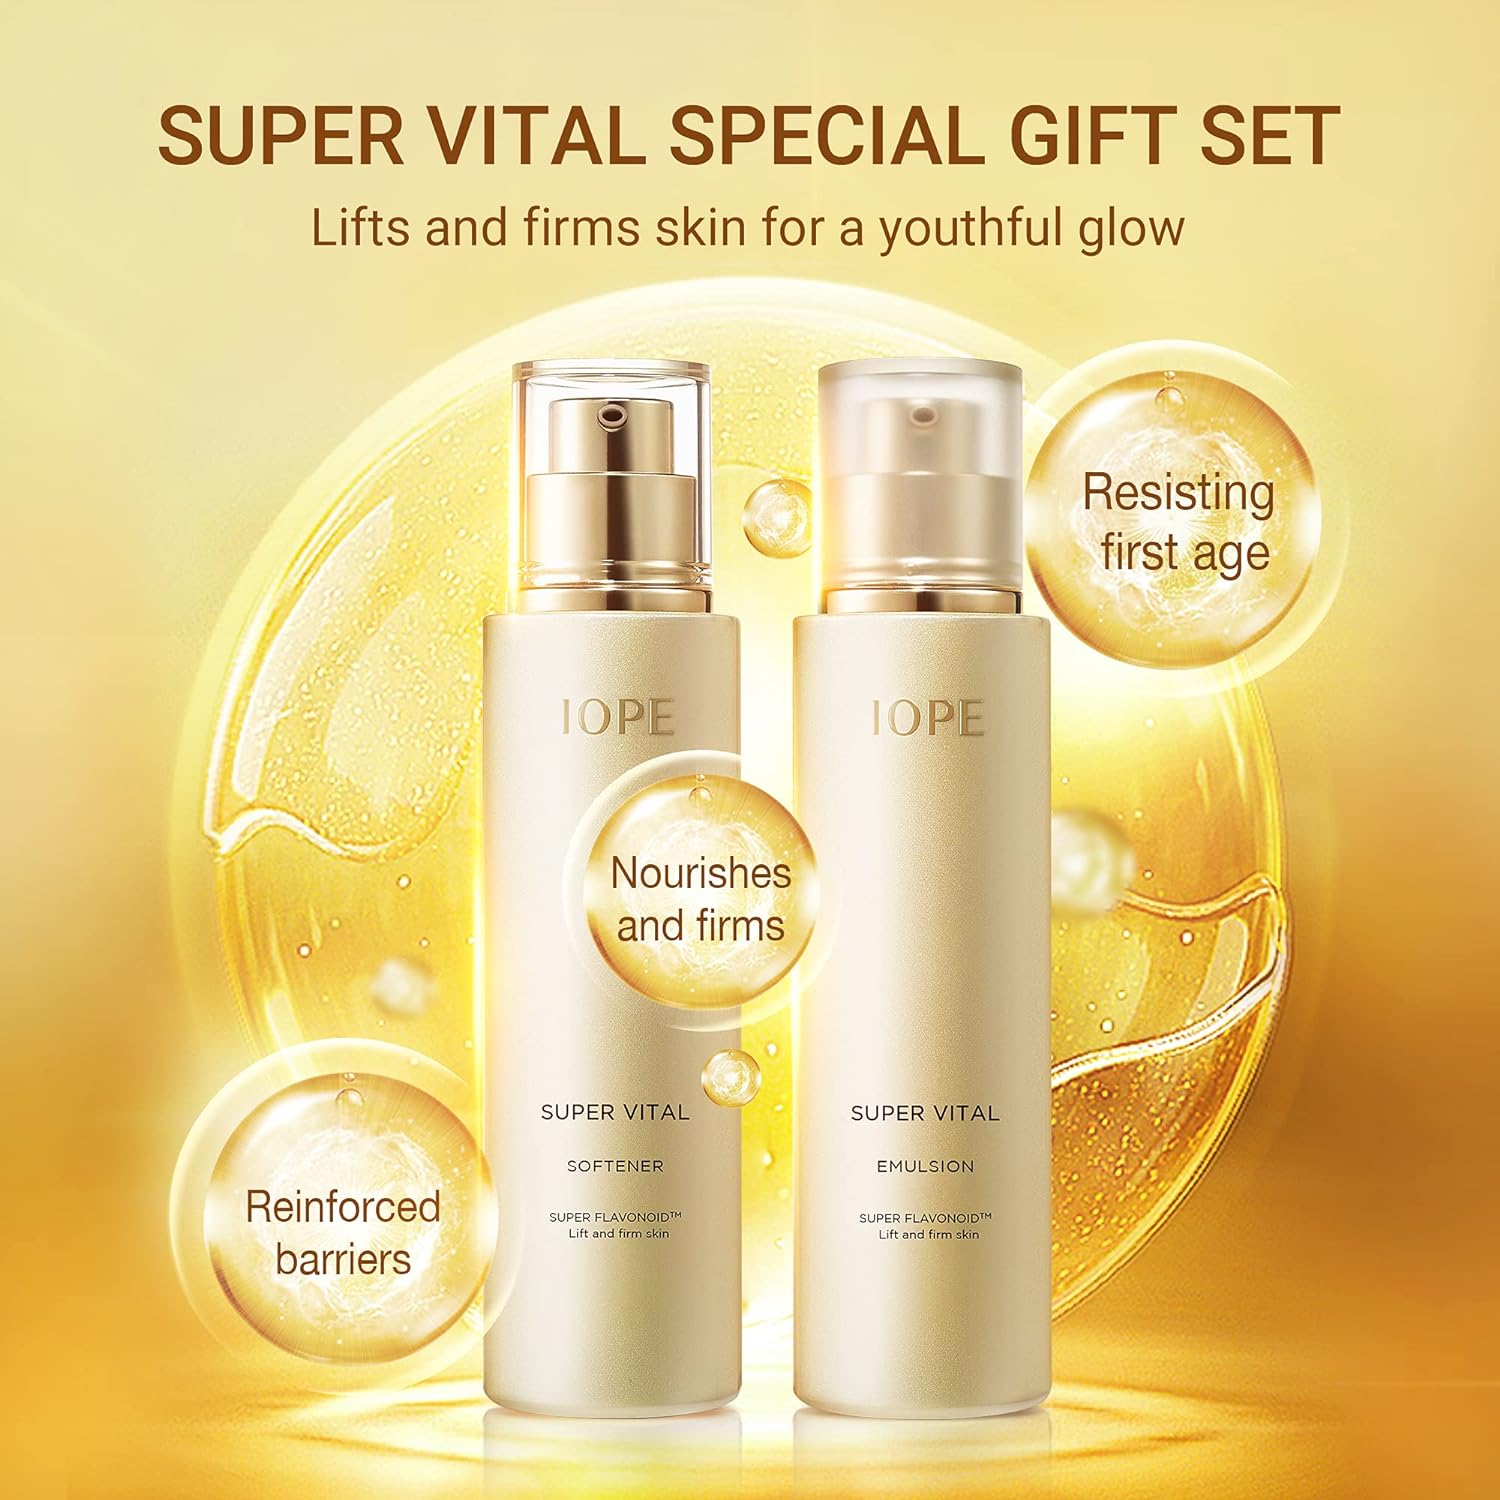 Super Vital Skin Care Set - Luxury Korean Skincare Gift Set for anti Aging, Including Face Toner, Lotion and Moisturizer for Wrinkle Care - Facial Care Kit for All Skin, for Hydration &amp; Lifting